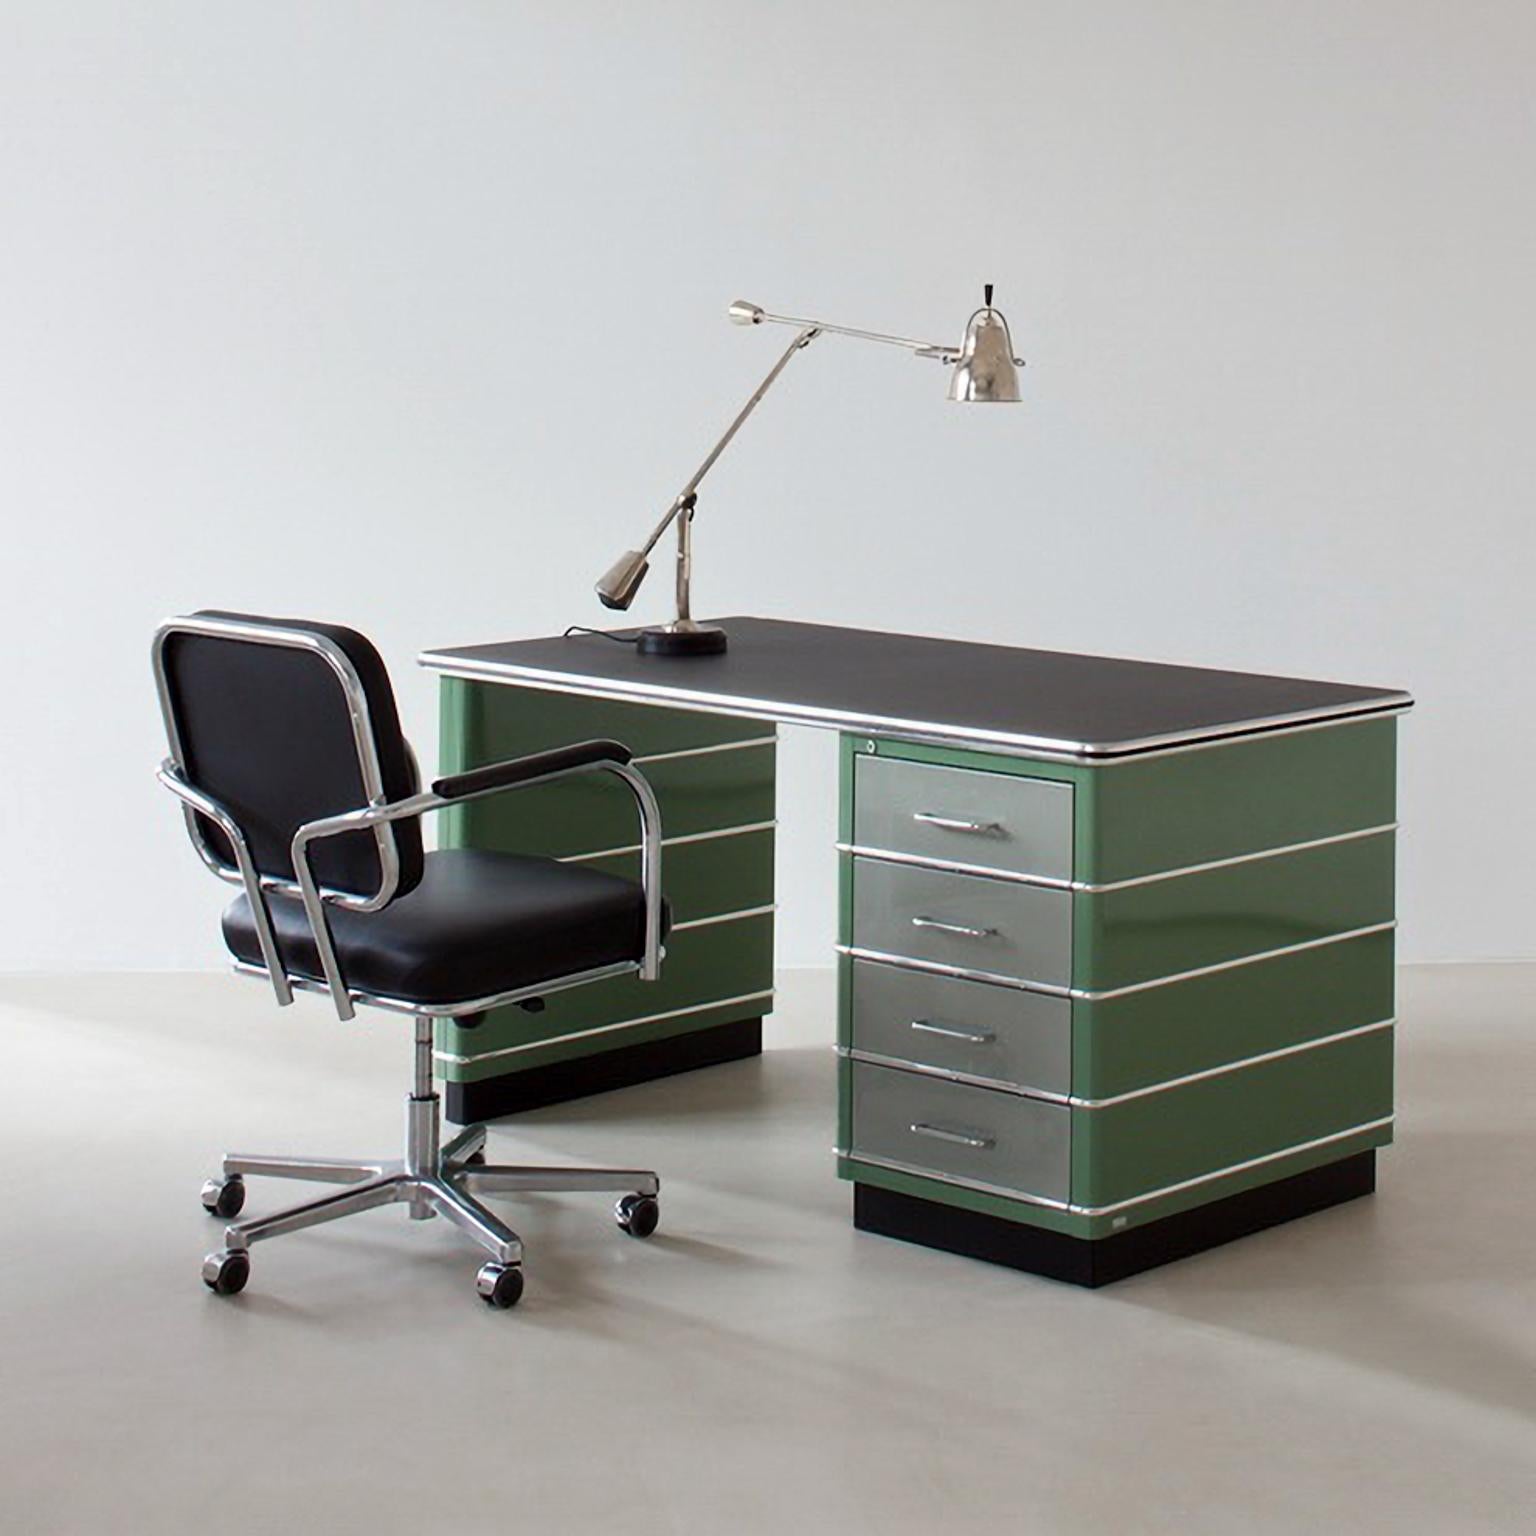 Made to Measure Metal Desk, Lacquered Metal, Industrial Design, Germany, 2018 In New Condition For Sale In Berlin, DE